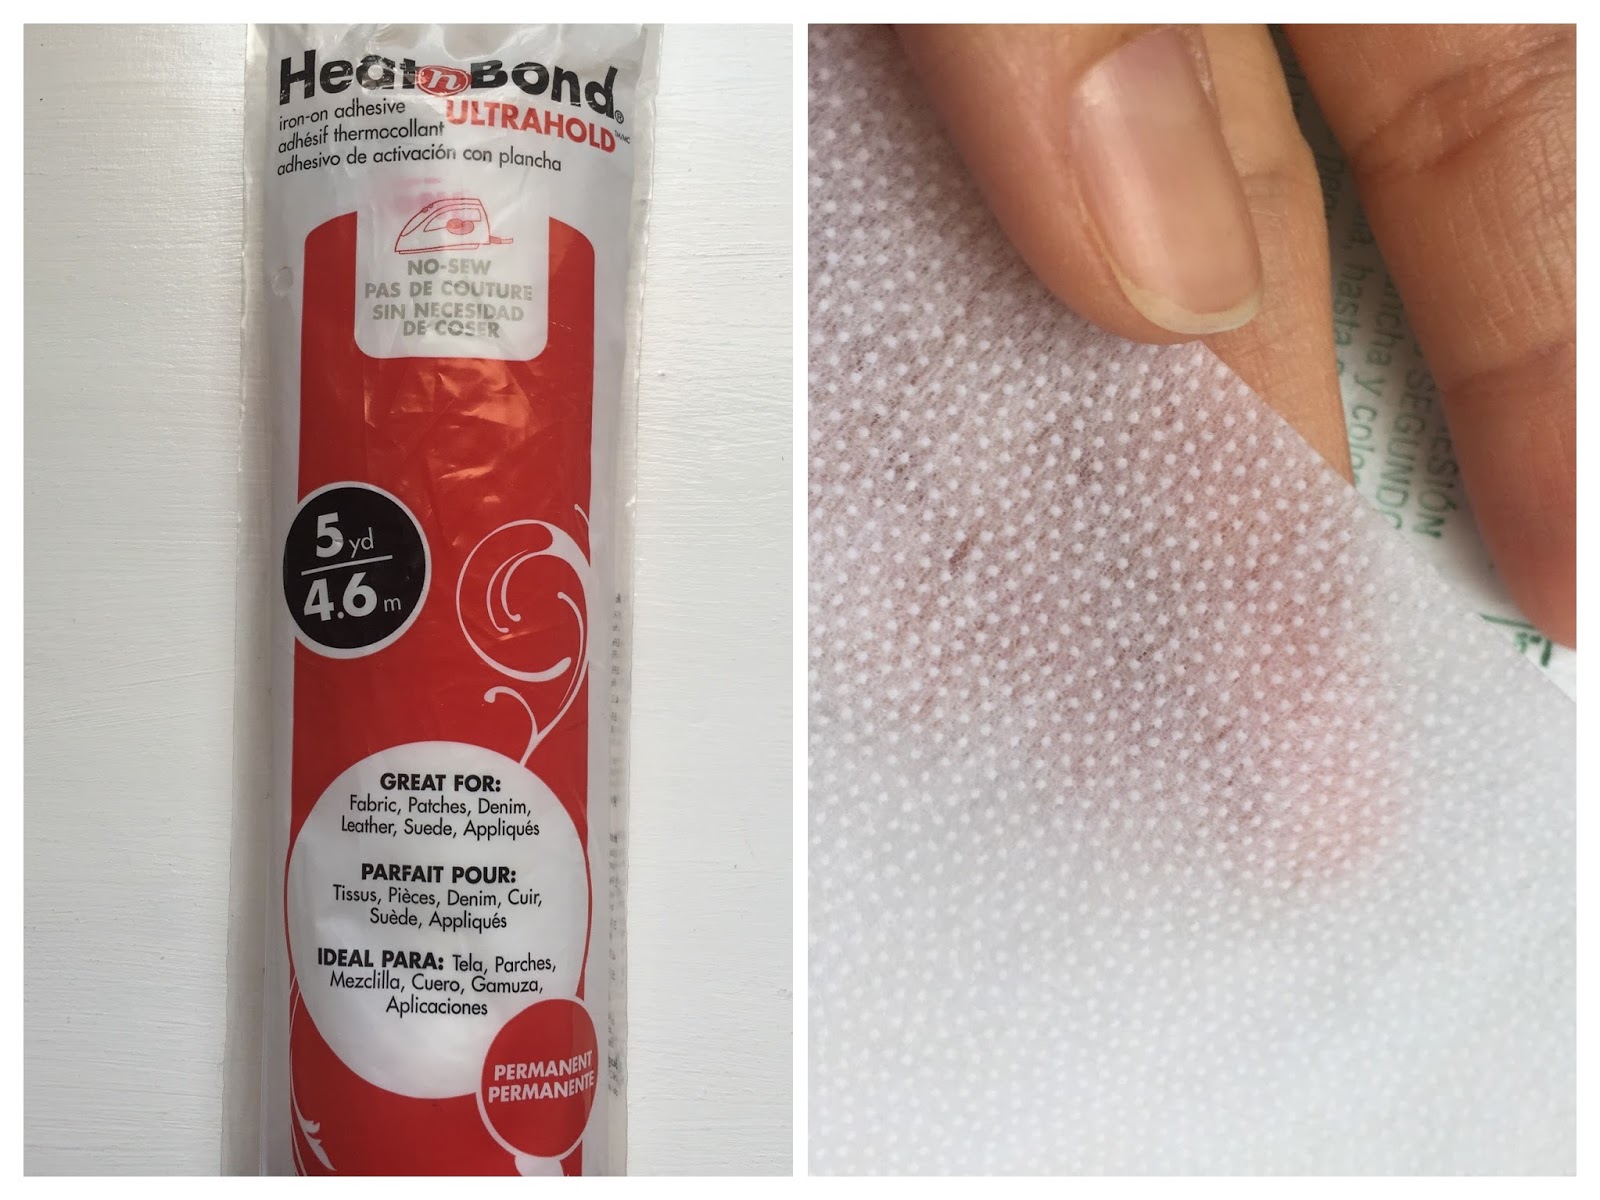 Heat and Bond Ultra Hold Iron On Adhesive No Sew 5yd / 4.6m